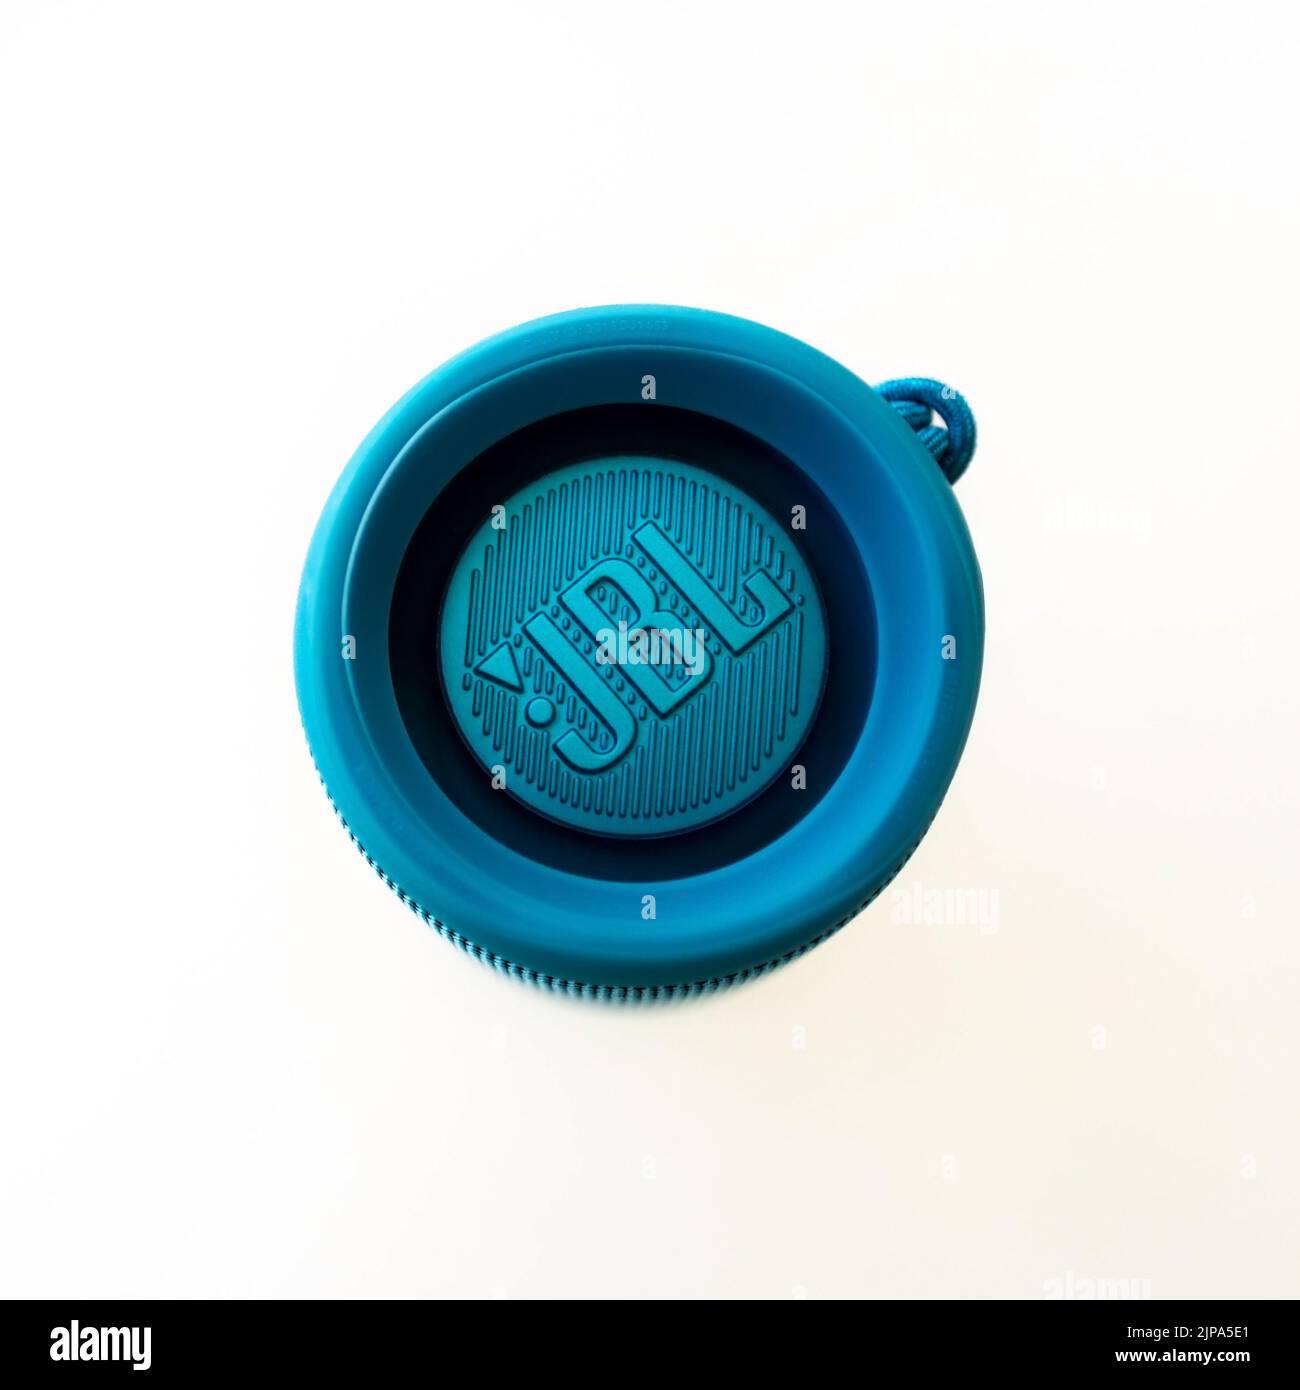 Apple Valley, CA, USA – August 11, 2022: Top view of the JBL logo on a Flip 5 portable wireless speaker. Stock Photo